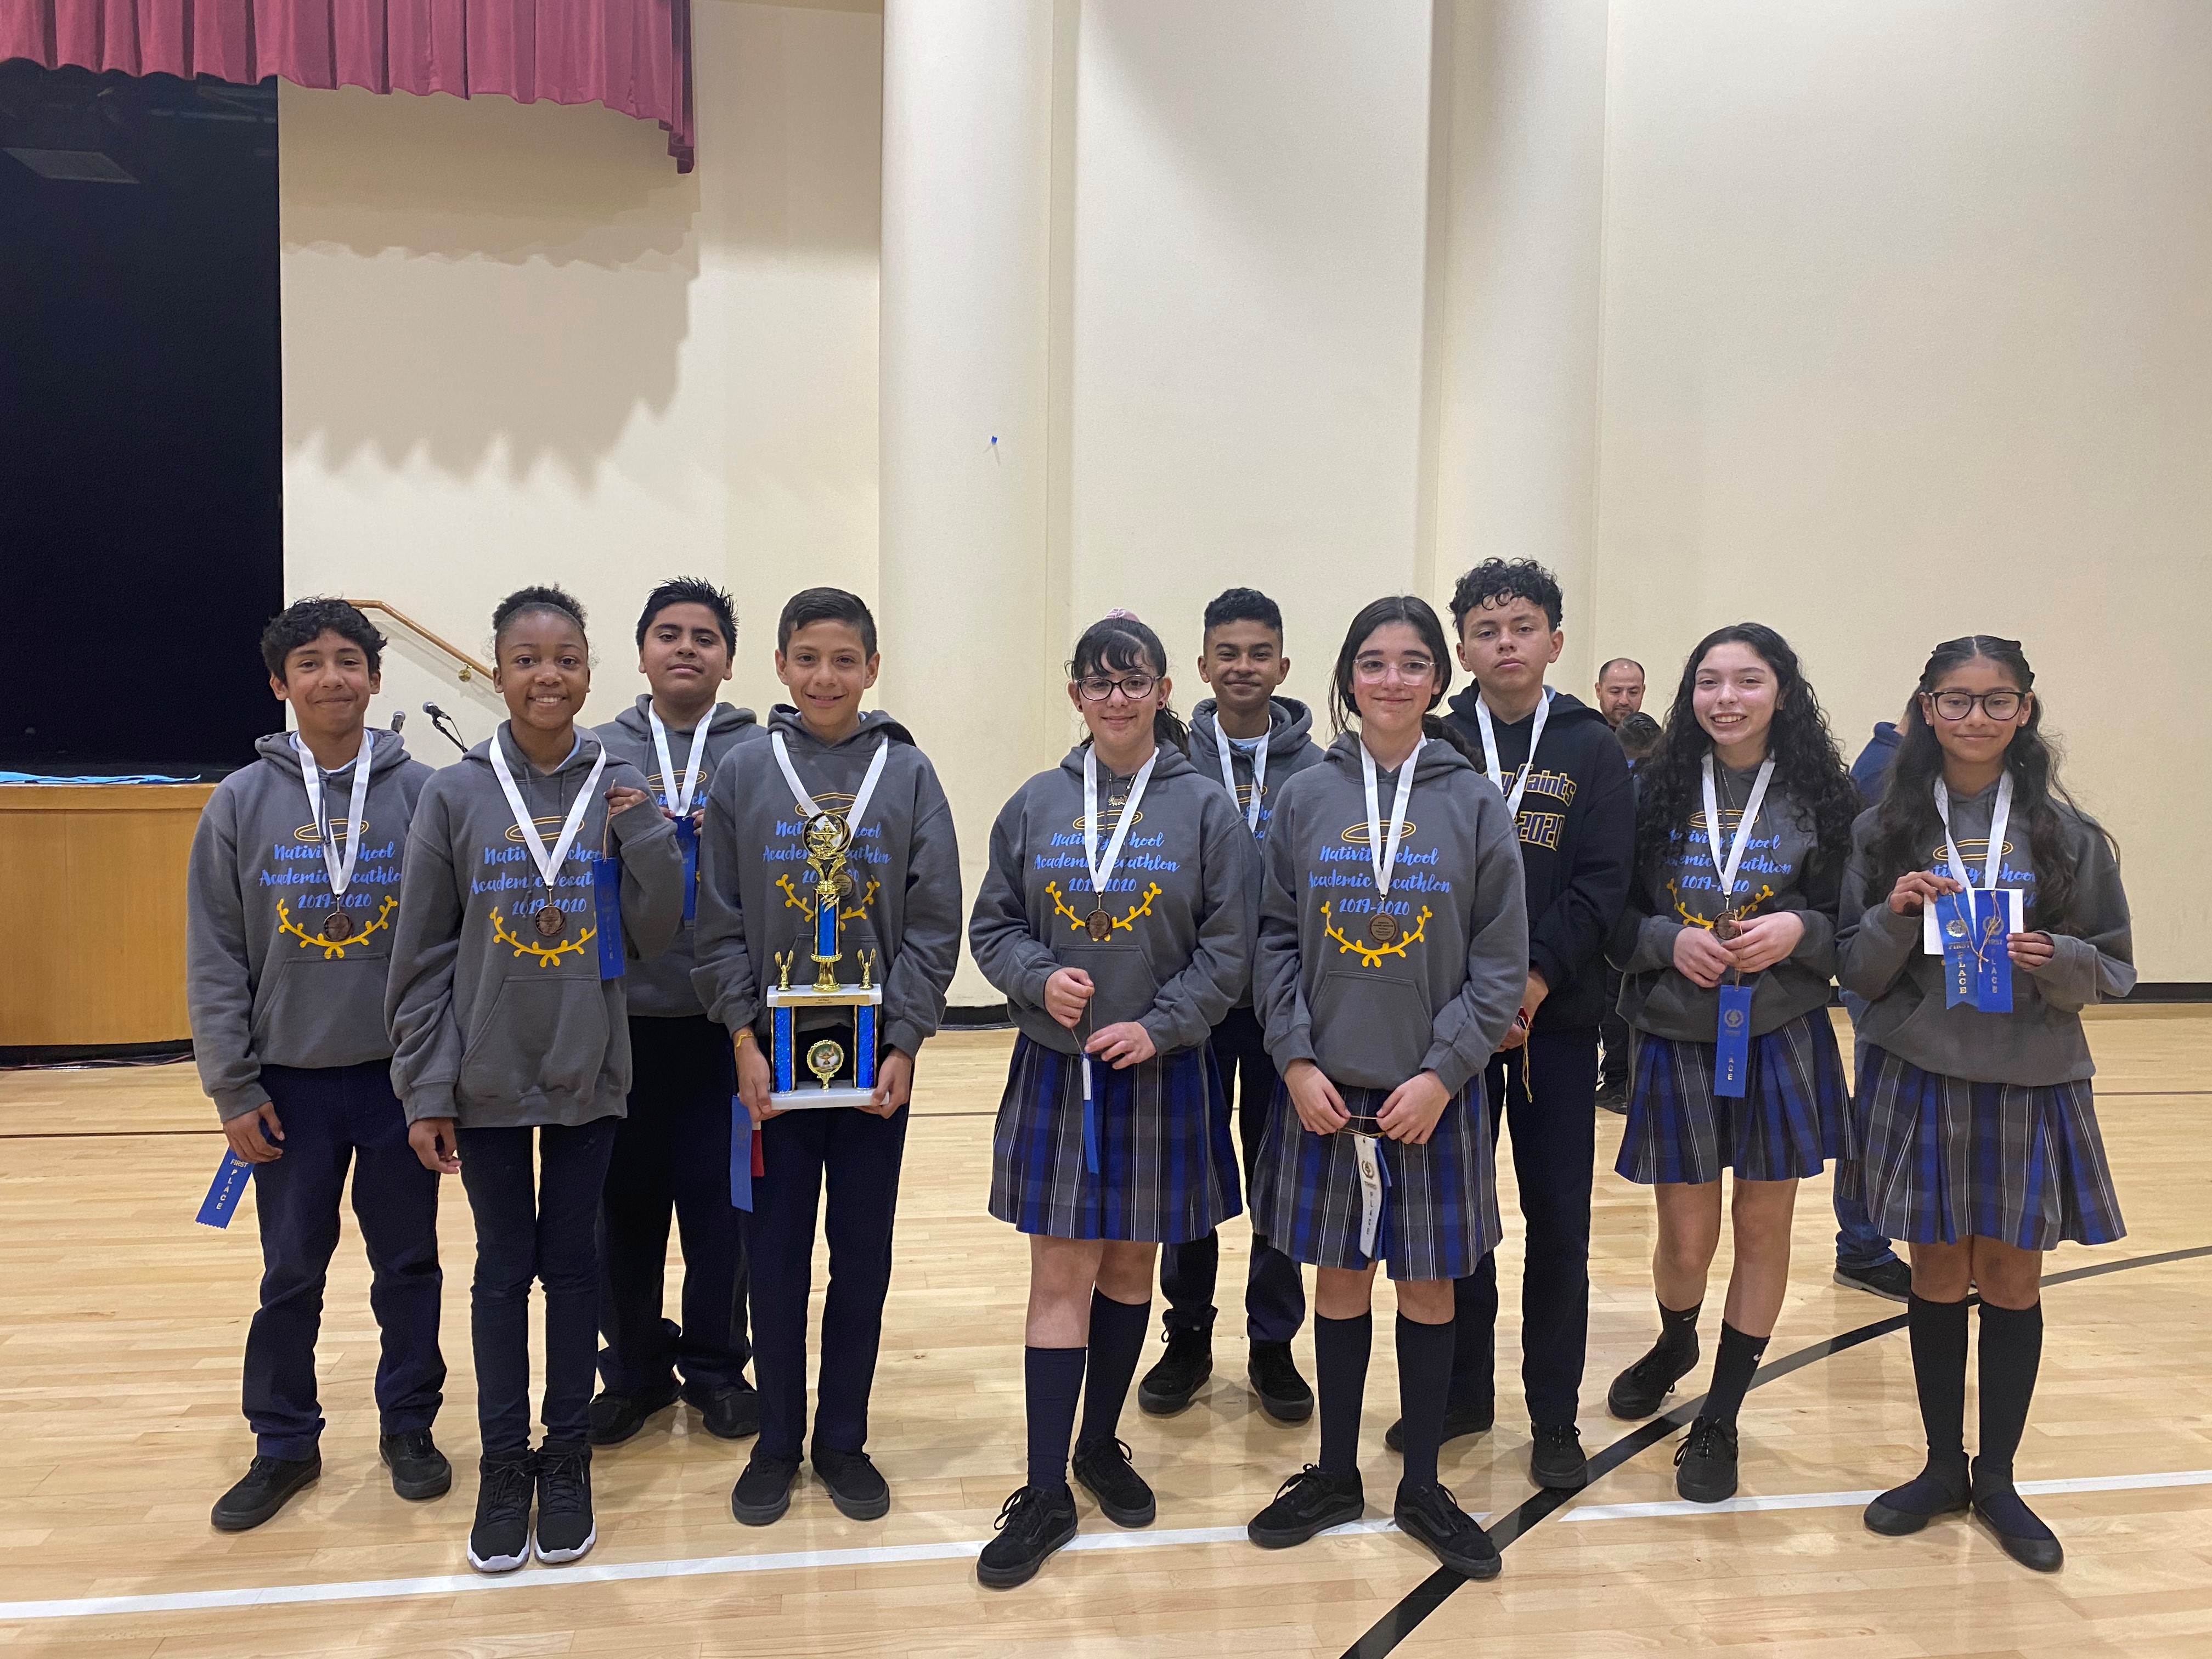 St. Helen Catholic School - Tomorrow our amazing Academic Decathlon team  will compete at the Archdiocese of Los Angeles Academic Junior High  Decathlon event. We are so proud of all their hard